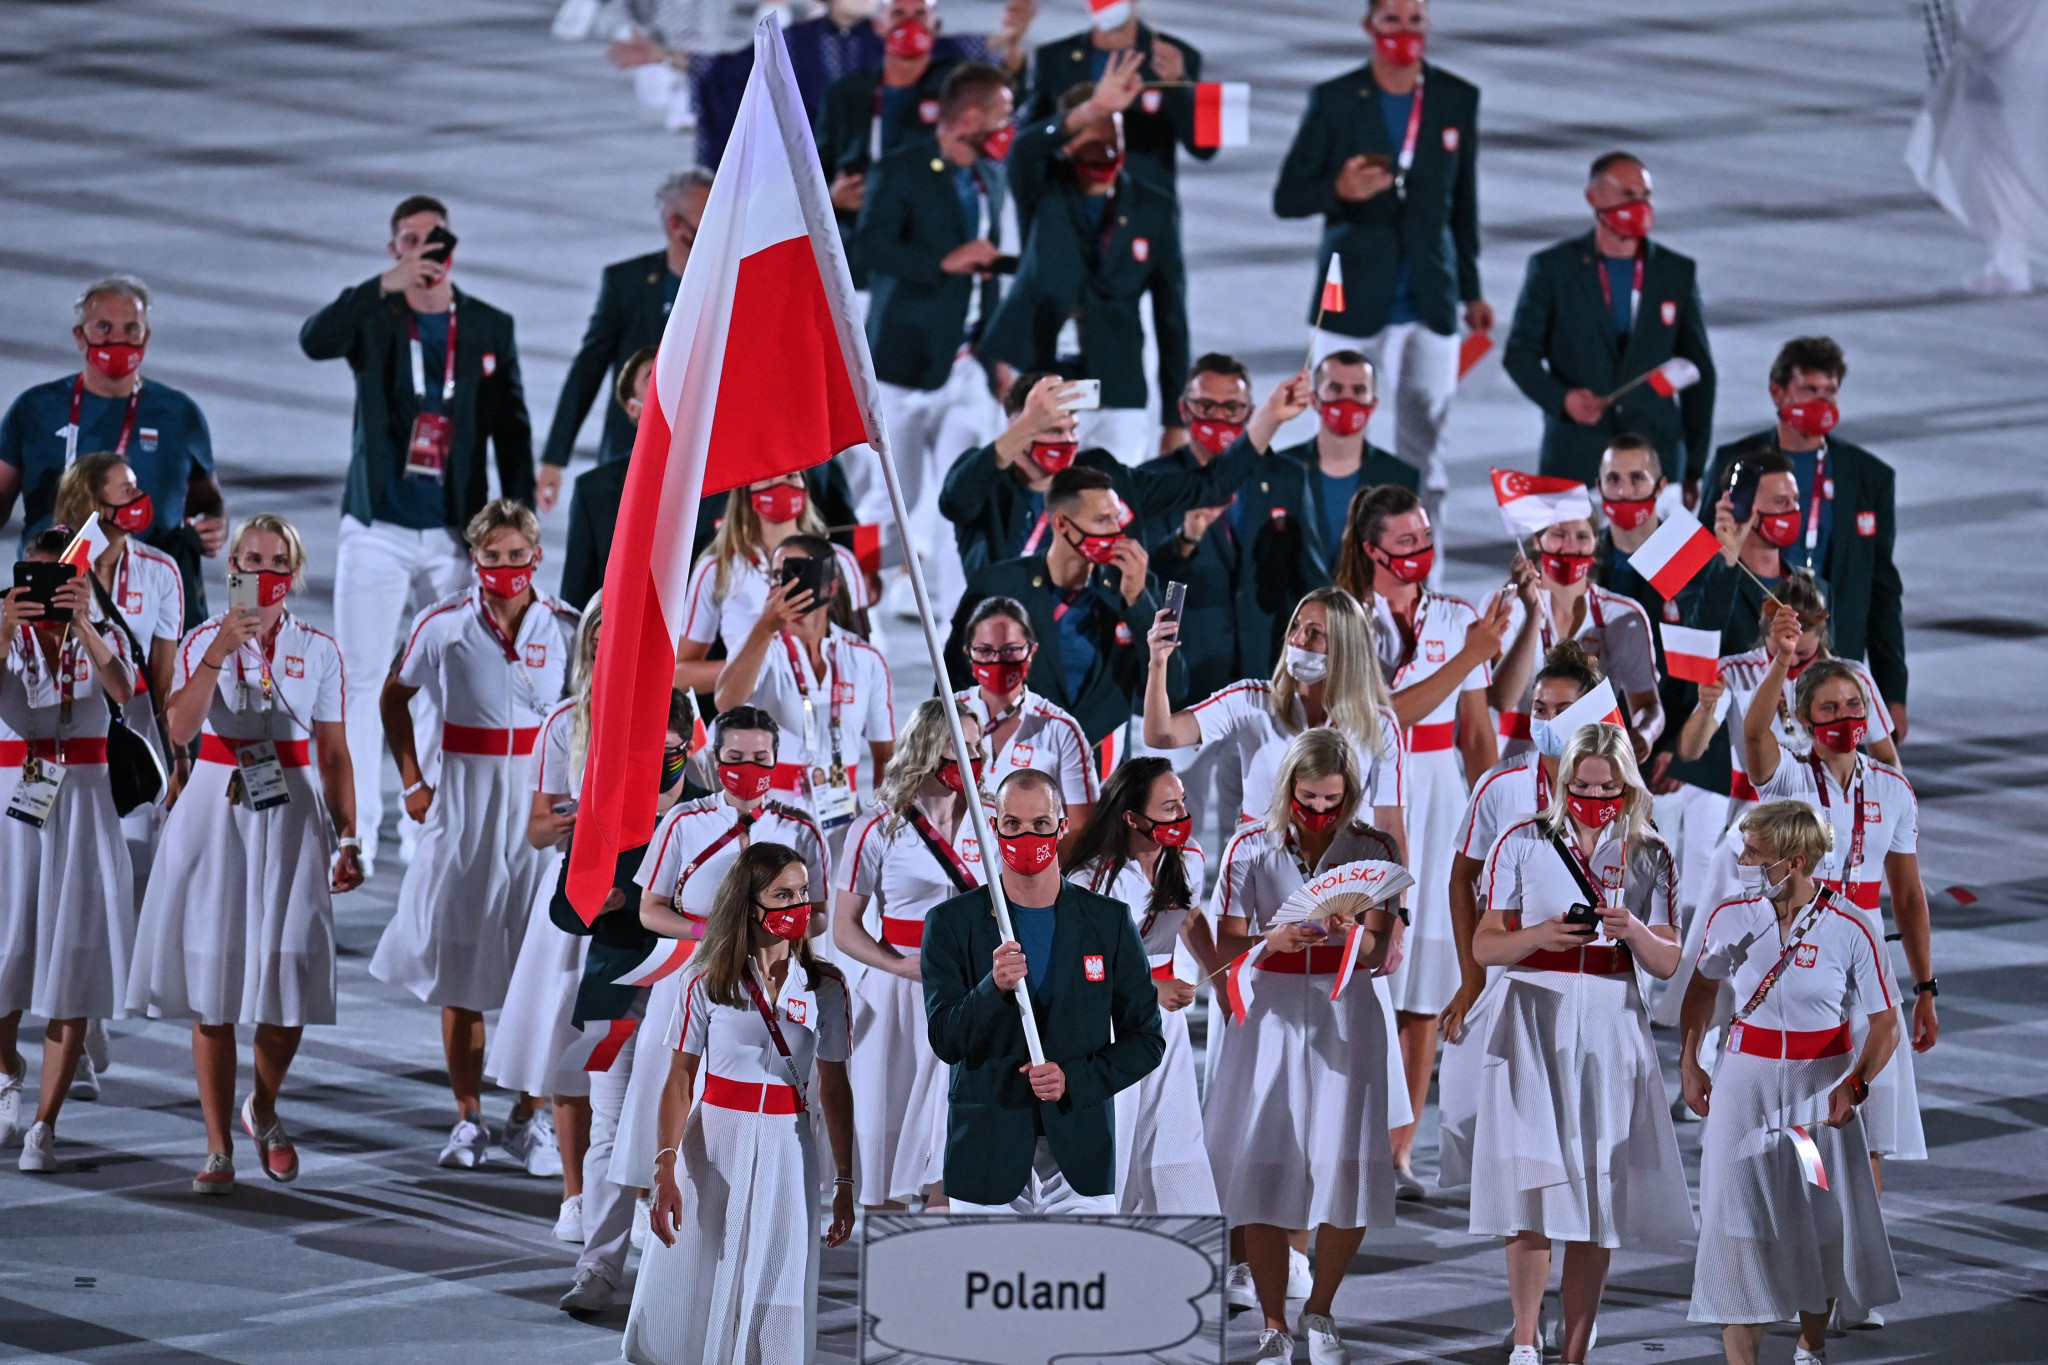 Piesiewicz elected new President of Polish Olympic Committee as Kraśnicki stands down